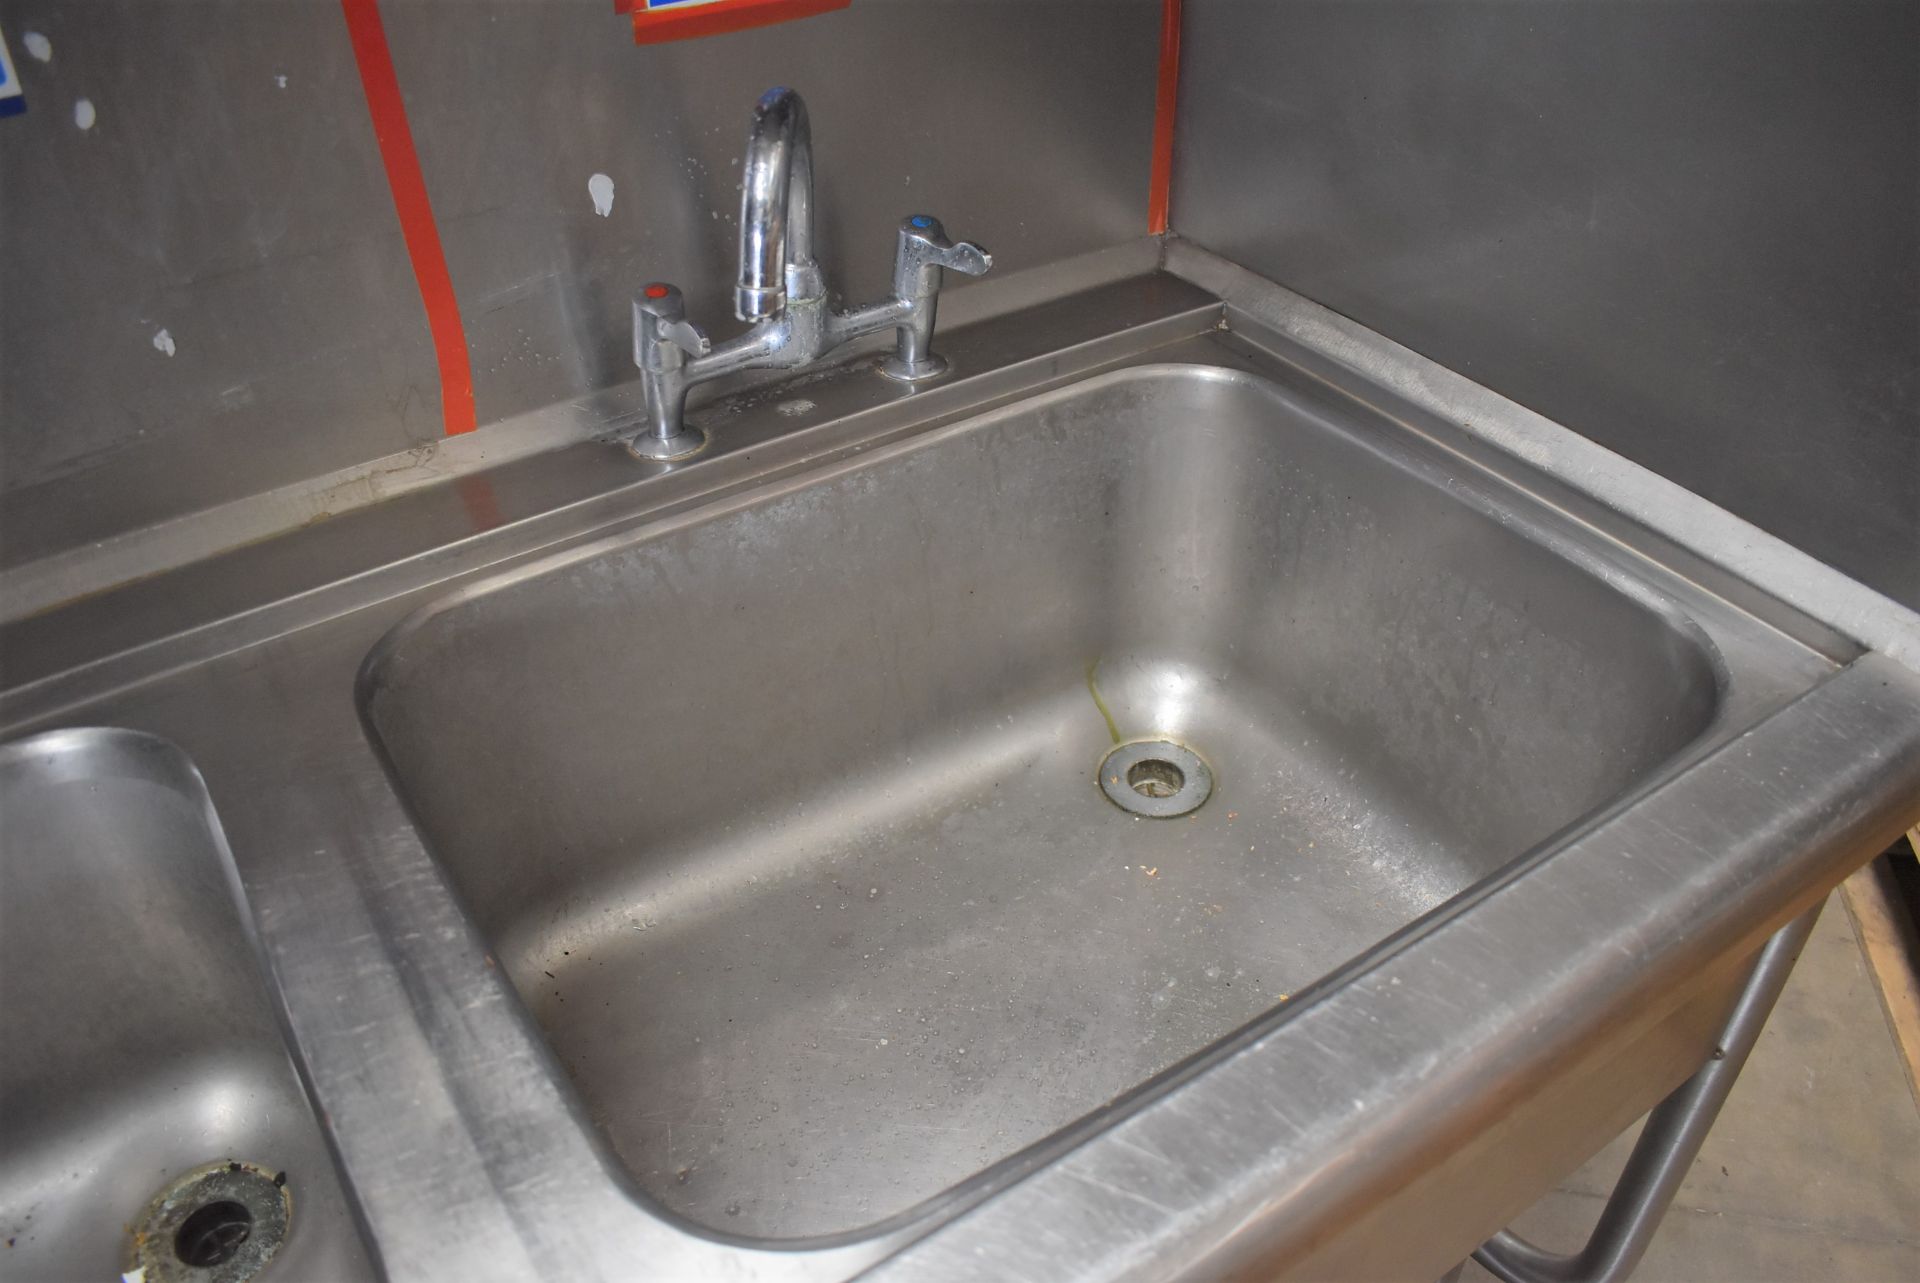 1 x Stainless Steel Twin Sink Wash Unit With Mixer Taps and Splash Back Surround - Width: 125 cms - Image 5 of 11